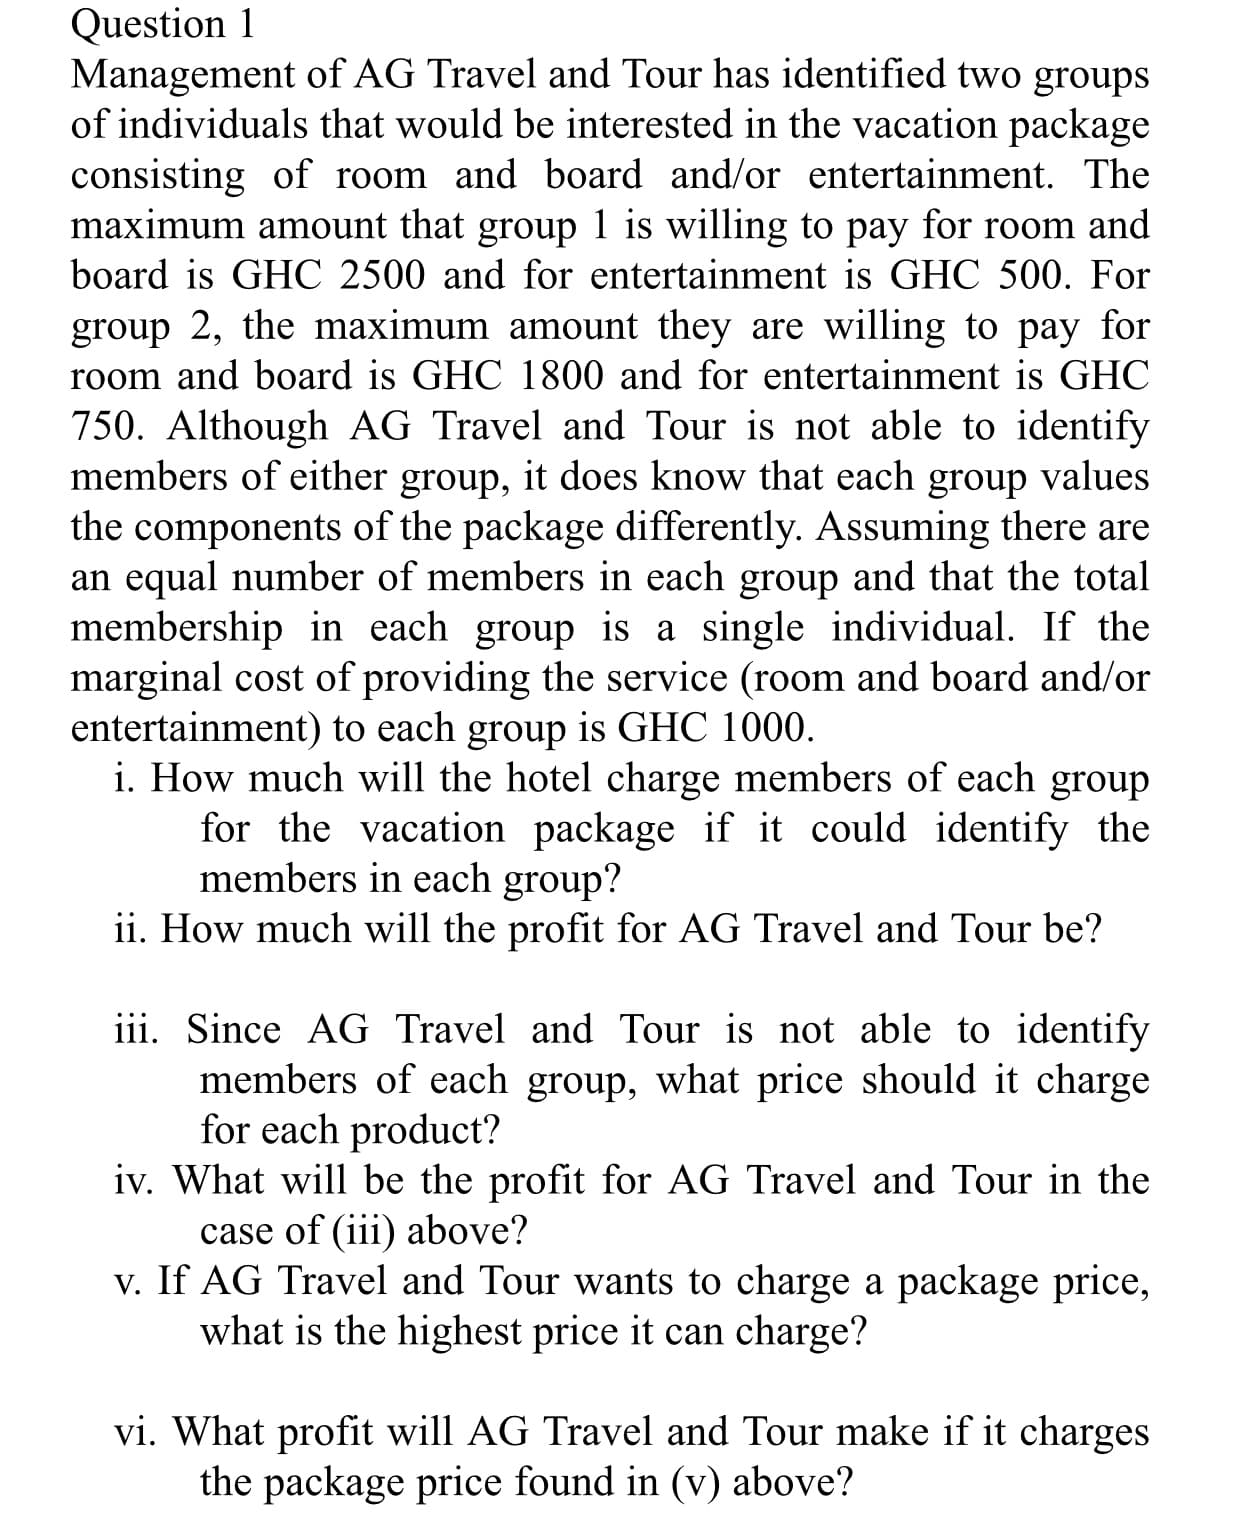 Management of AG Travel and Tour has identified two groups
of individuals that would be interested in the vacation package
consisting of room and board and/or entertainment. The
maximum amount that group 1 is willing to pay for room and
board is GHC 2500 and for entertainment is GHC 500. For
group 2, the maximum amount they are willing to pay for
room and board is GHC 1800 and for entertainment is GHC
750. Although AG Travel and Tour is not able to identify
members of either group, it does know that each group values
the components of the package differently. Assuming there are
an equal number of members in each group and that the total
membership in each group is a single individual. If the
marginal cost of providing the service (room and board and/or
entertainment) to each group is GHC 1000.
i. How much will the hotel charge members of each group
for the vacation package if it could identify the
members in each group?
ii. How much will the profit for AG Travel and Tour be?
iii. Since AG Travel and Tour is not able to identify
members of each group, what price should it charge
for each product?
